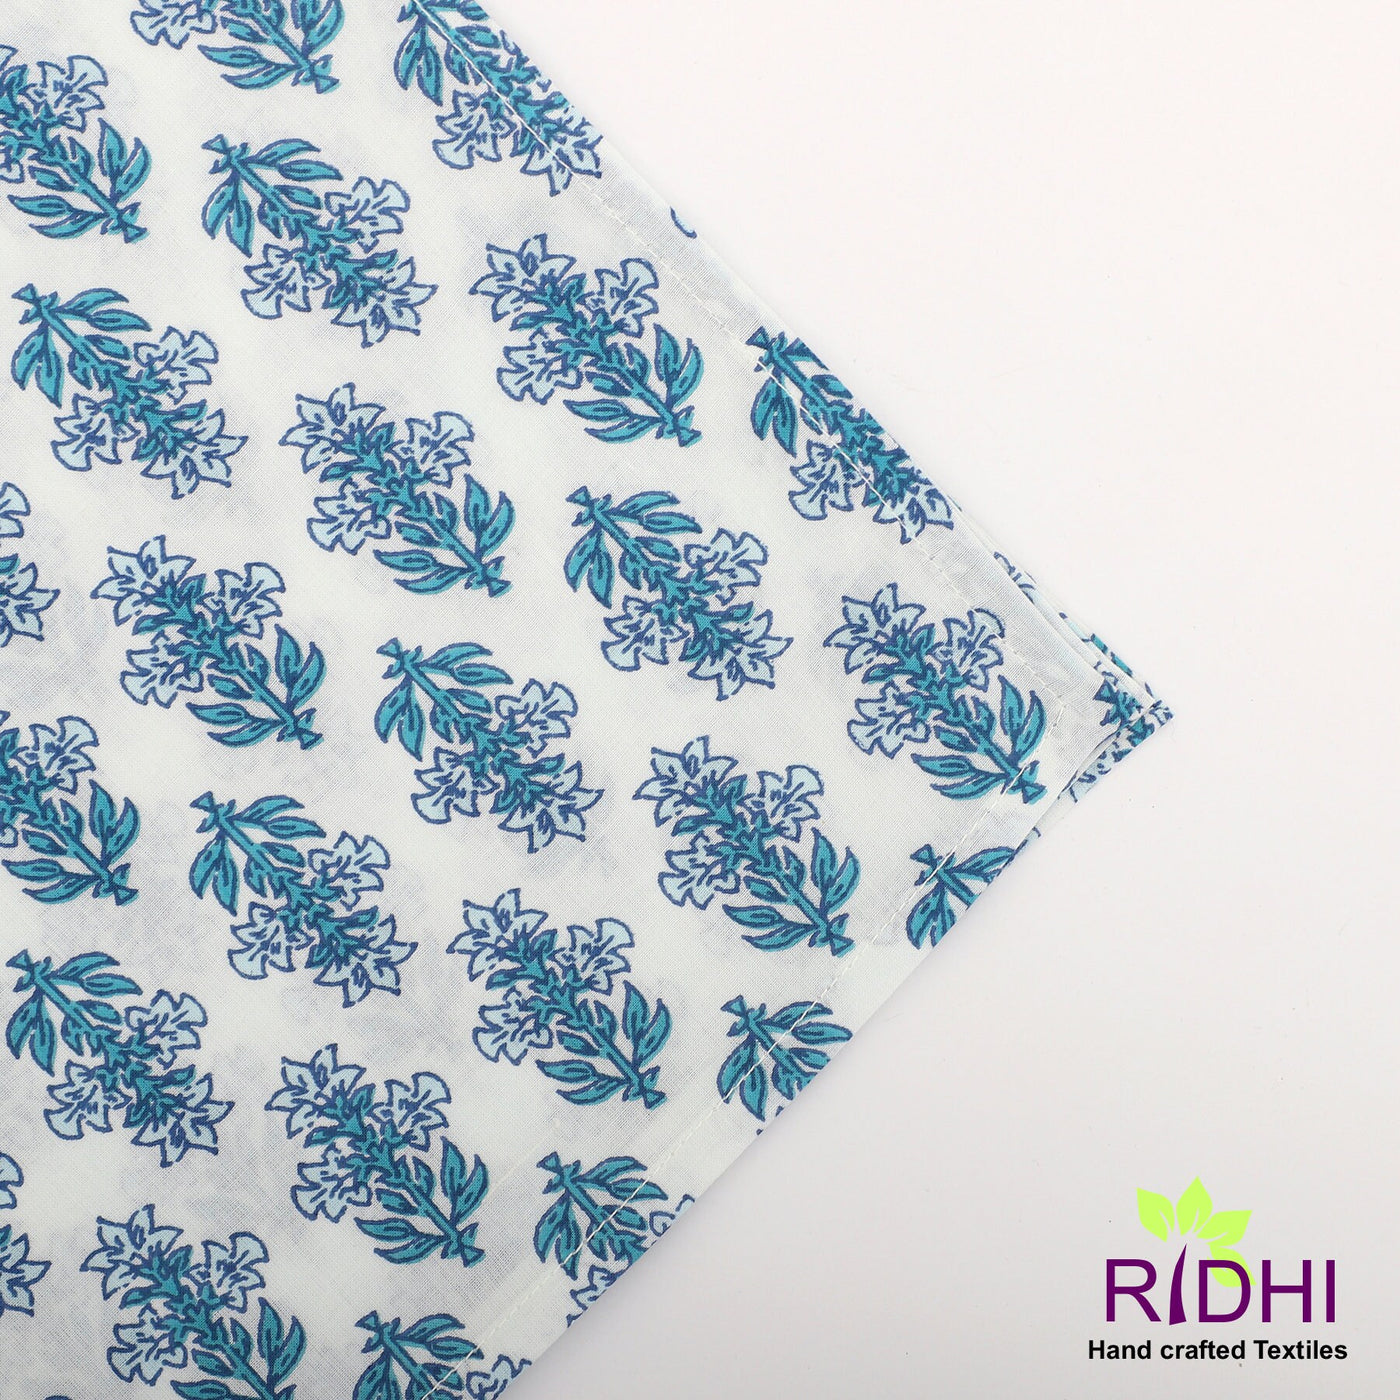 Powder and Ocean Blue Indian Floral Printed 100% Pure Cotton Cloth Napkins, Valentines Gift, 18x18"- Cocktail Napkins, 20x20"- Dinner Napkins